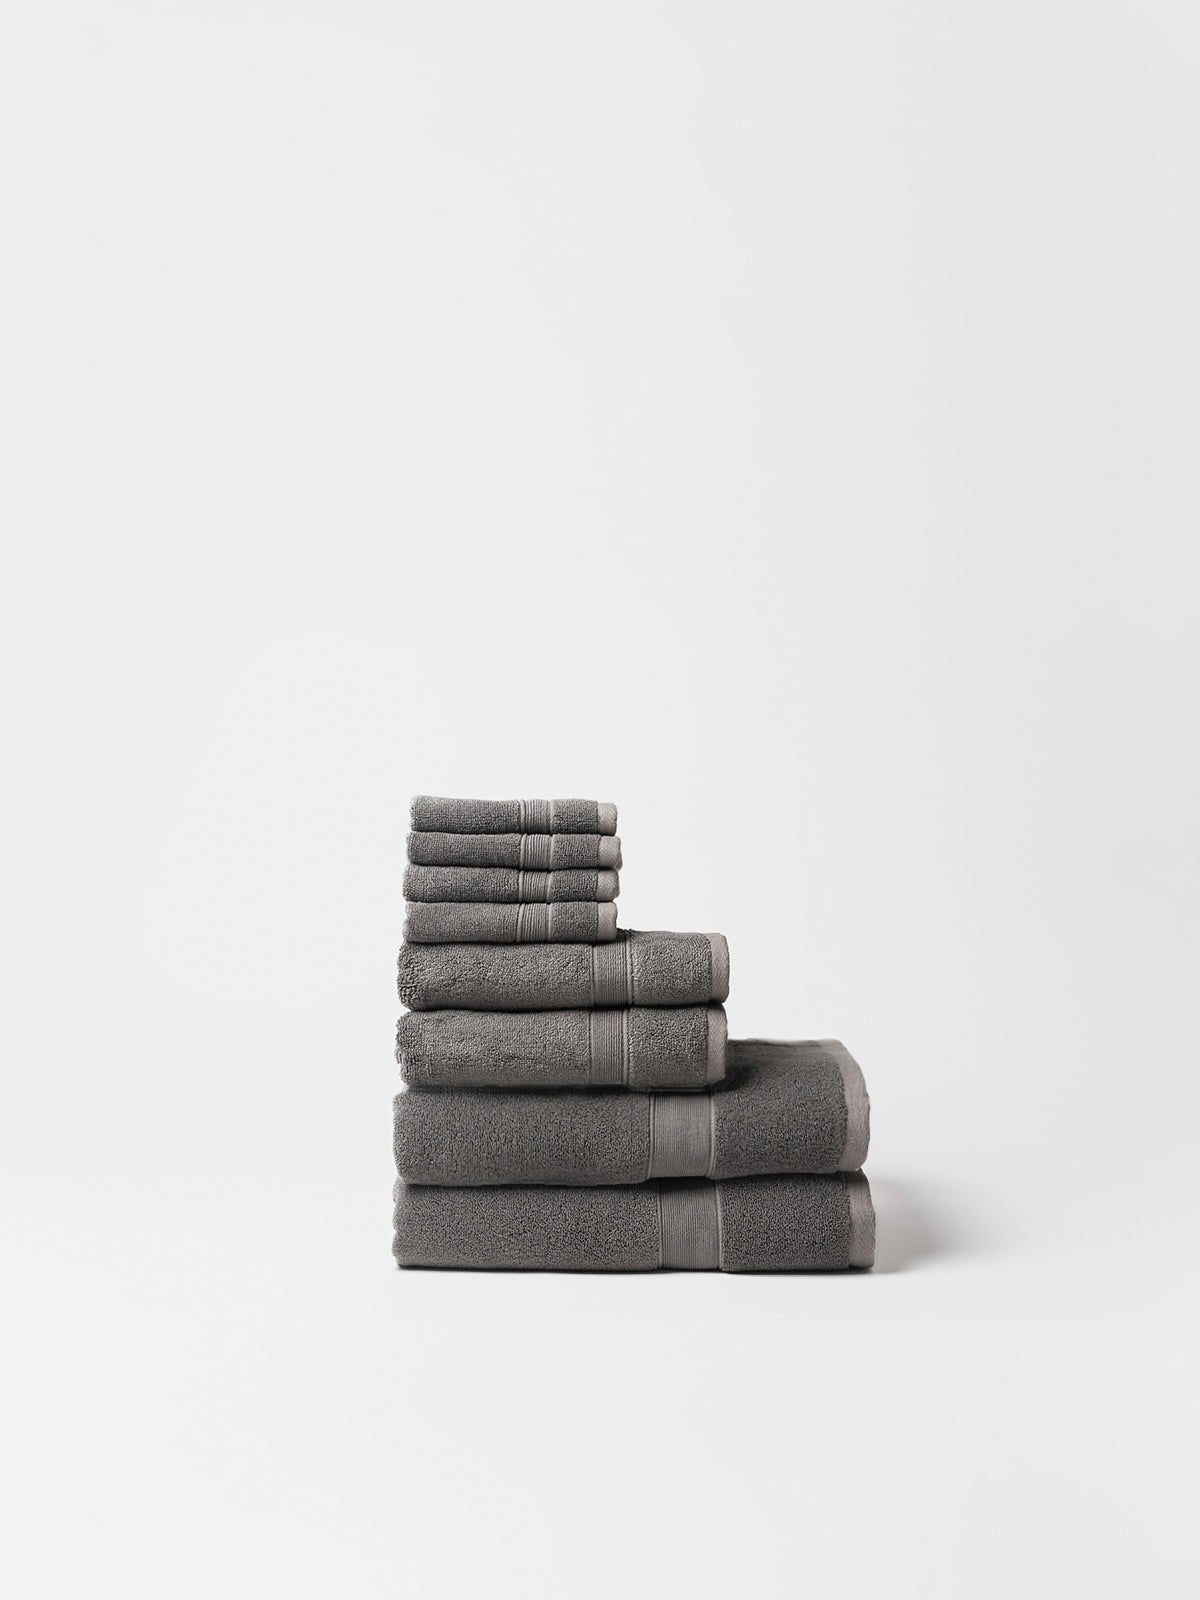 Charcoal luxe bath towel set folded with white background |Color:Charcoal